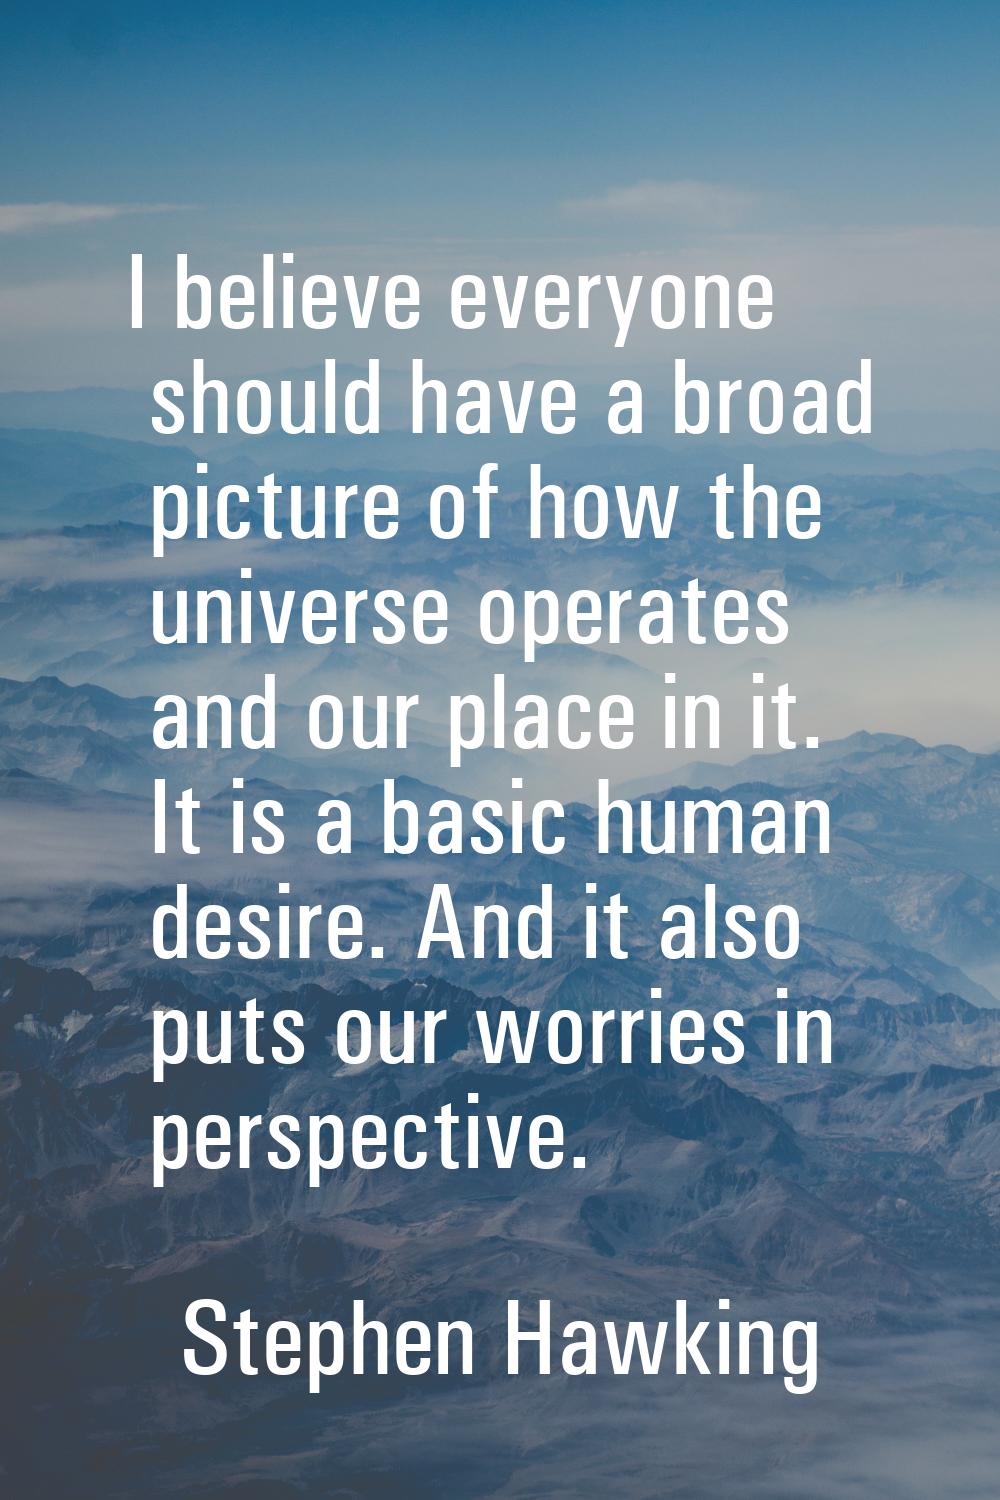 I believe everyone should have a broad picture of how the universe operates and our place in it. It